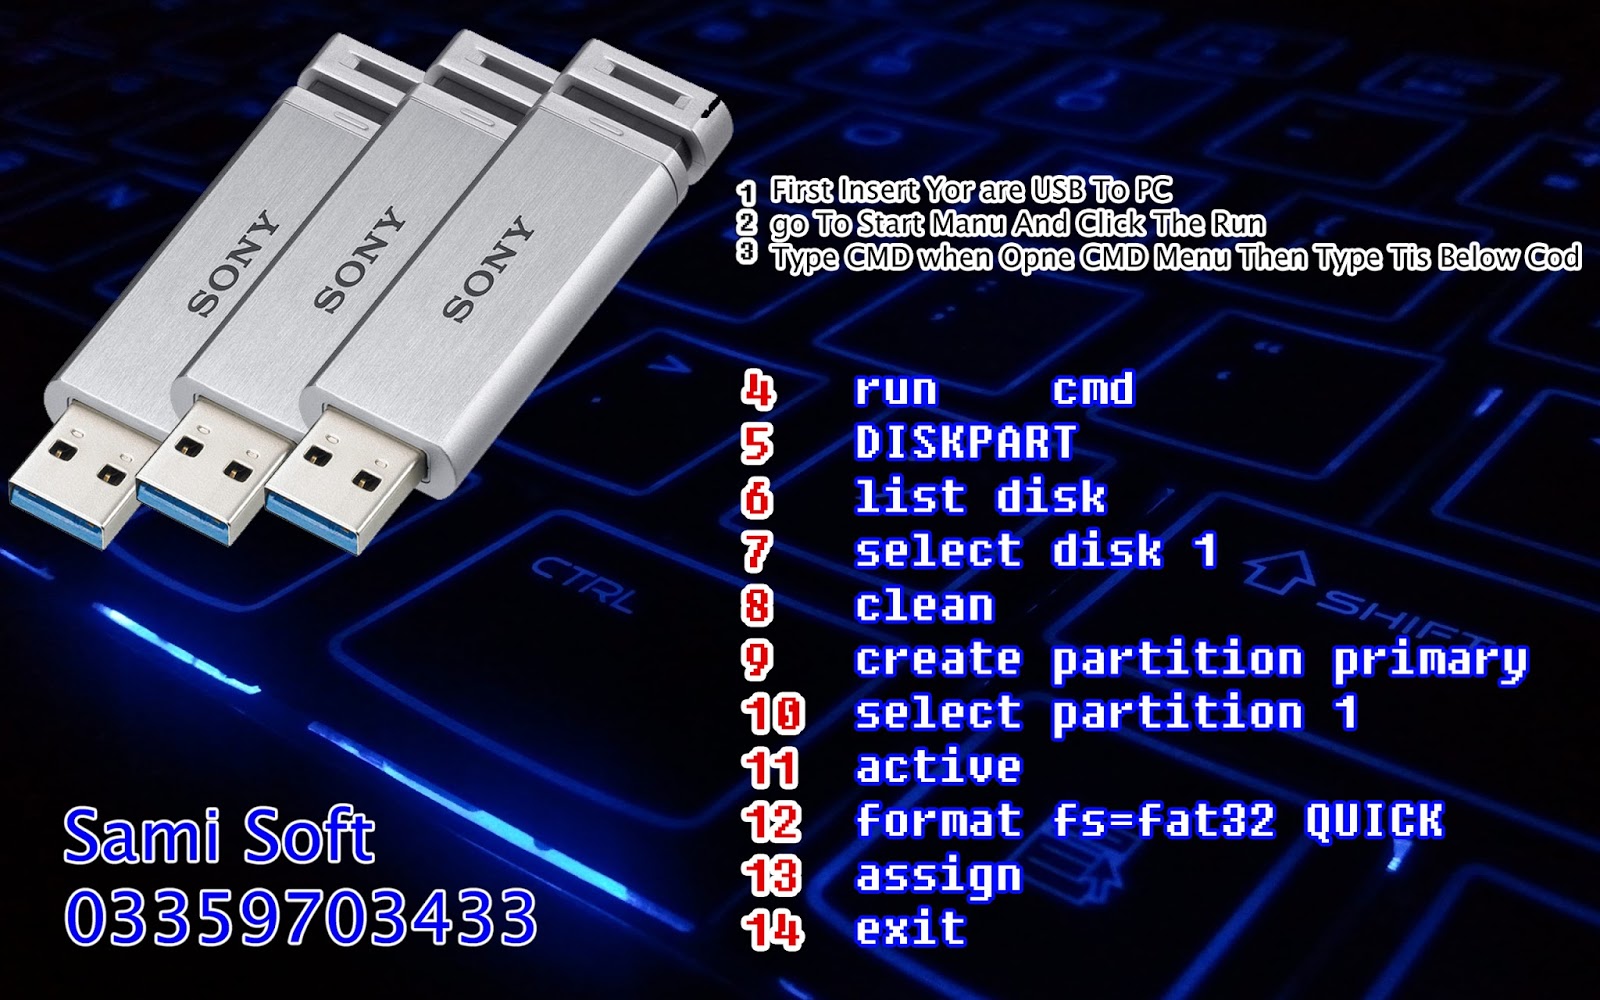 Usb Bootable Software For Windows 7 Free Download Full Version